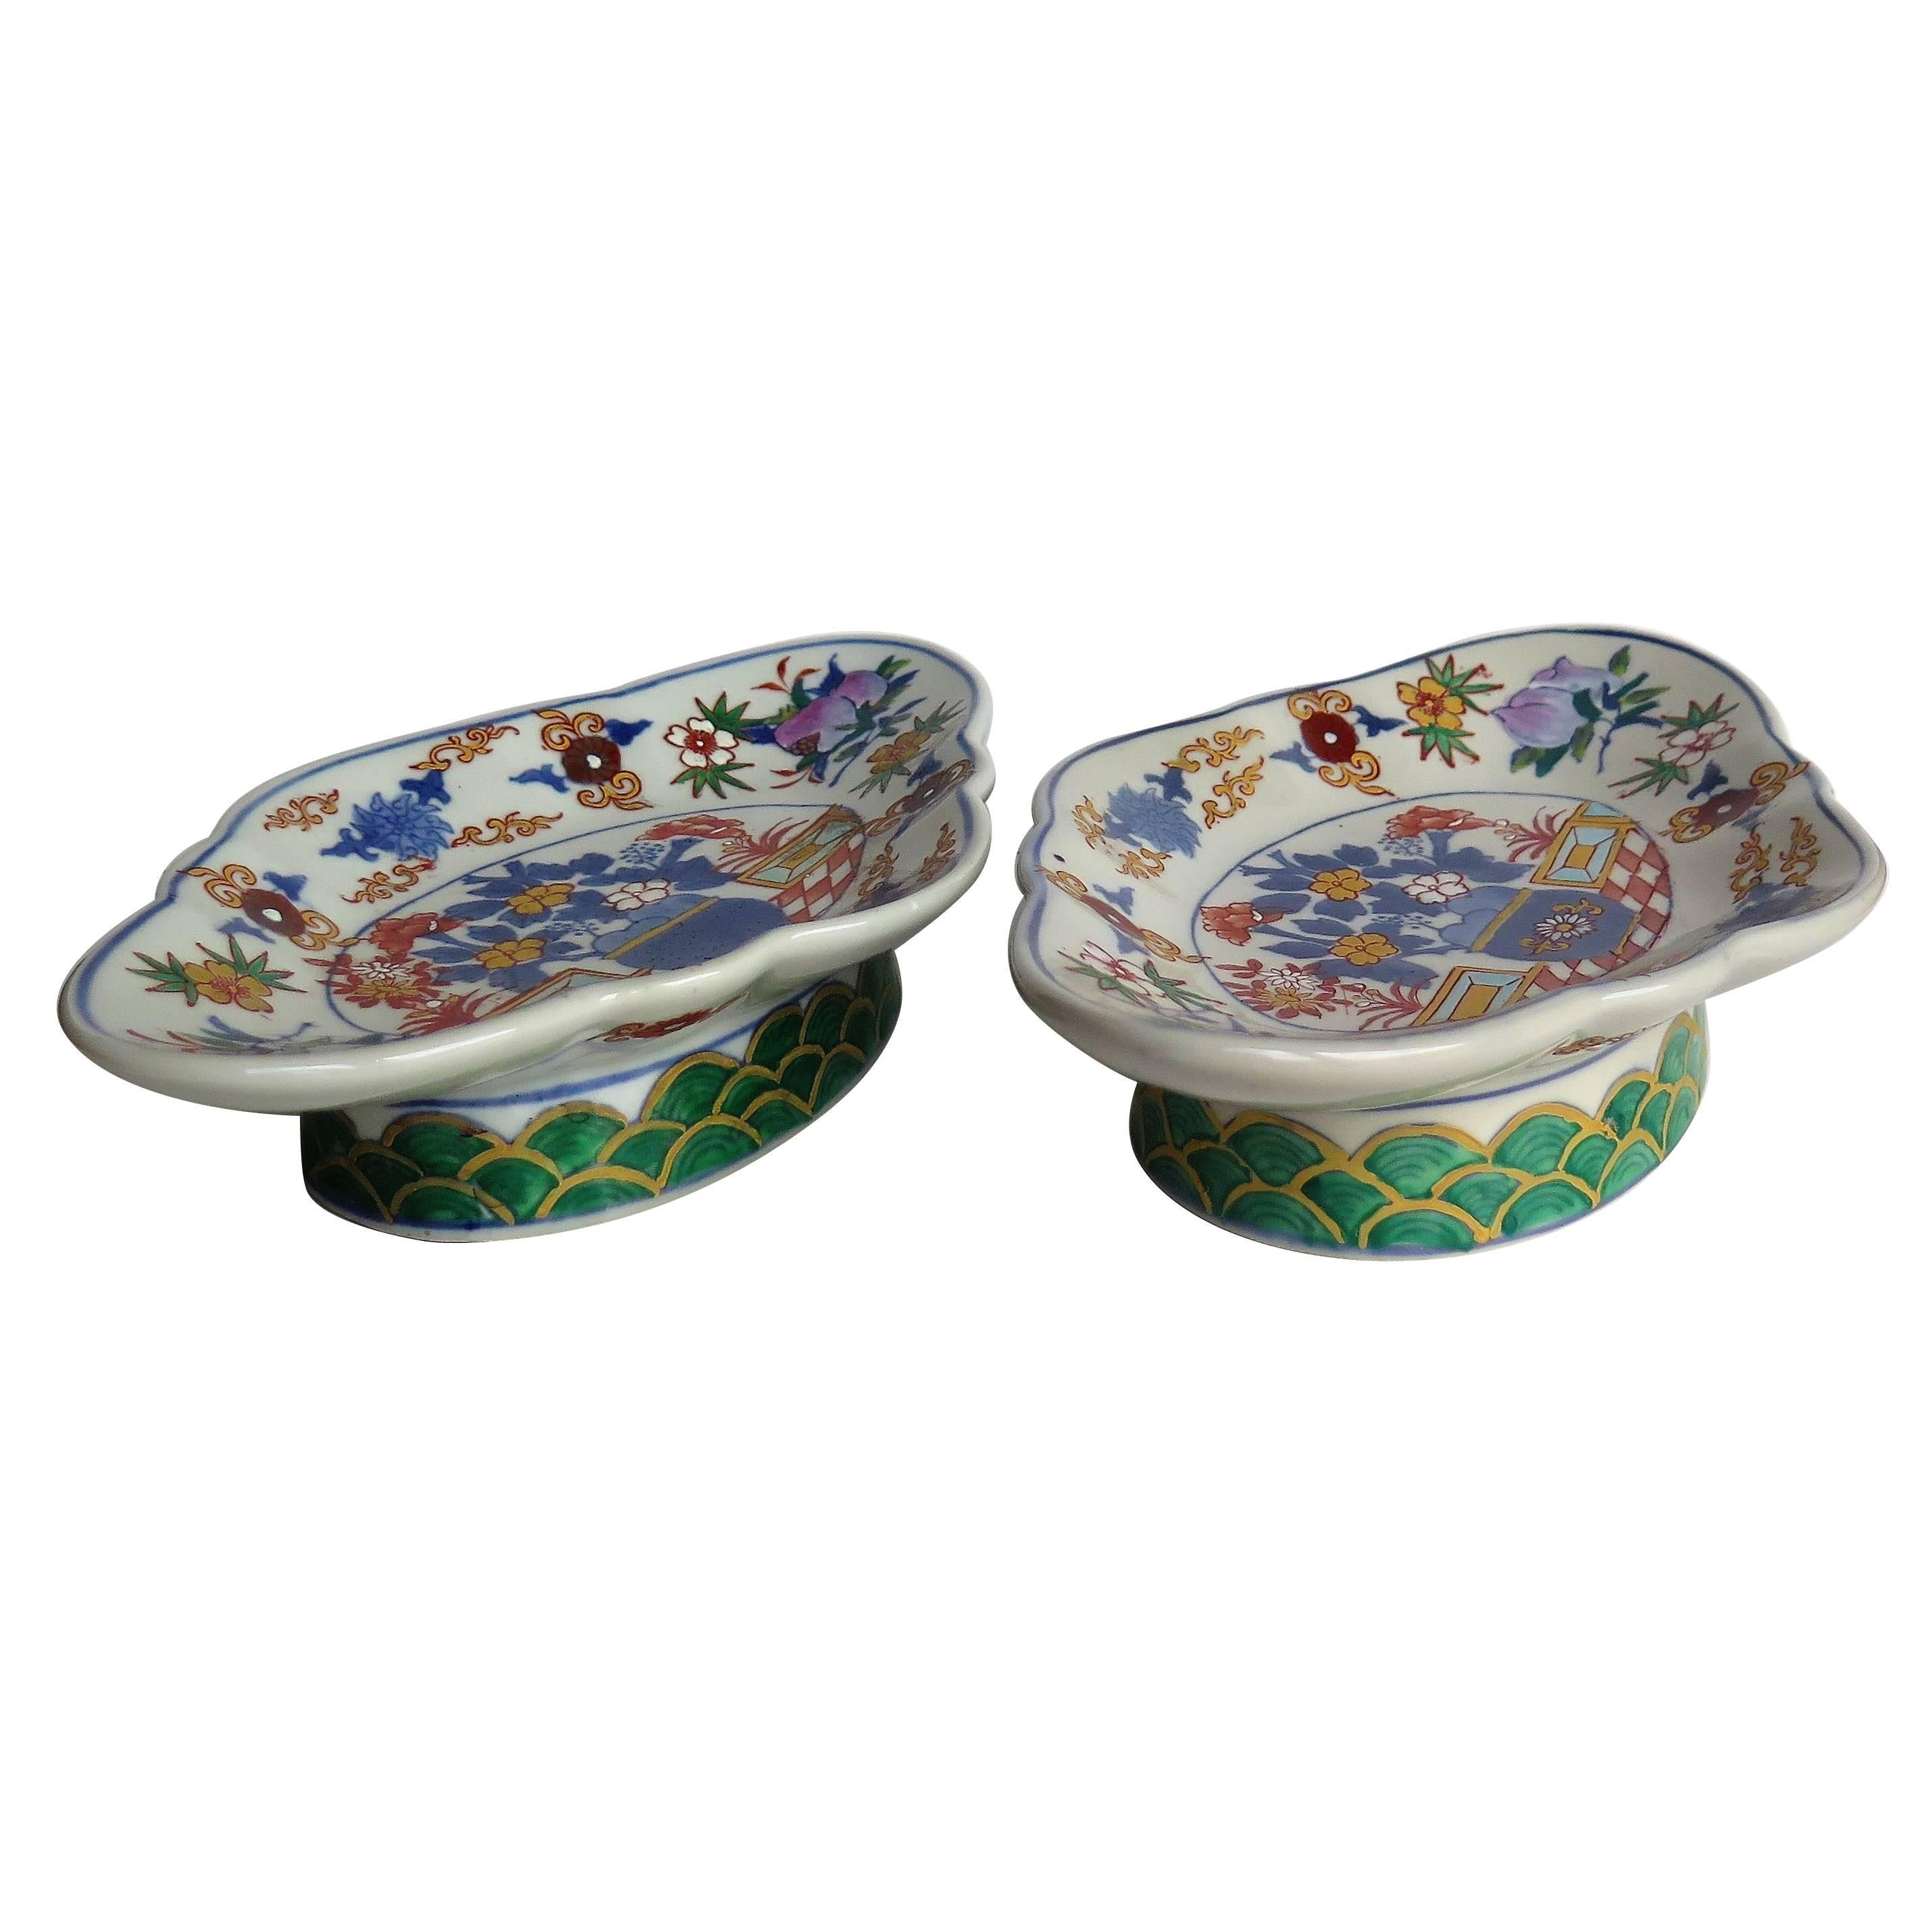 Pair of Bowls, Chinese Export, Hand Painted Porcelain, Late Qing, C.1900